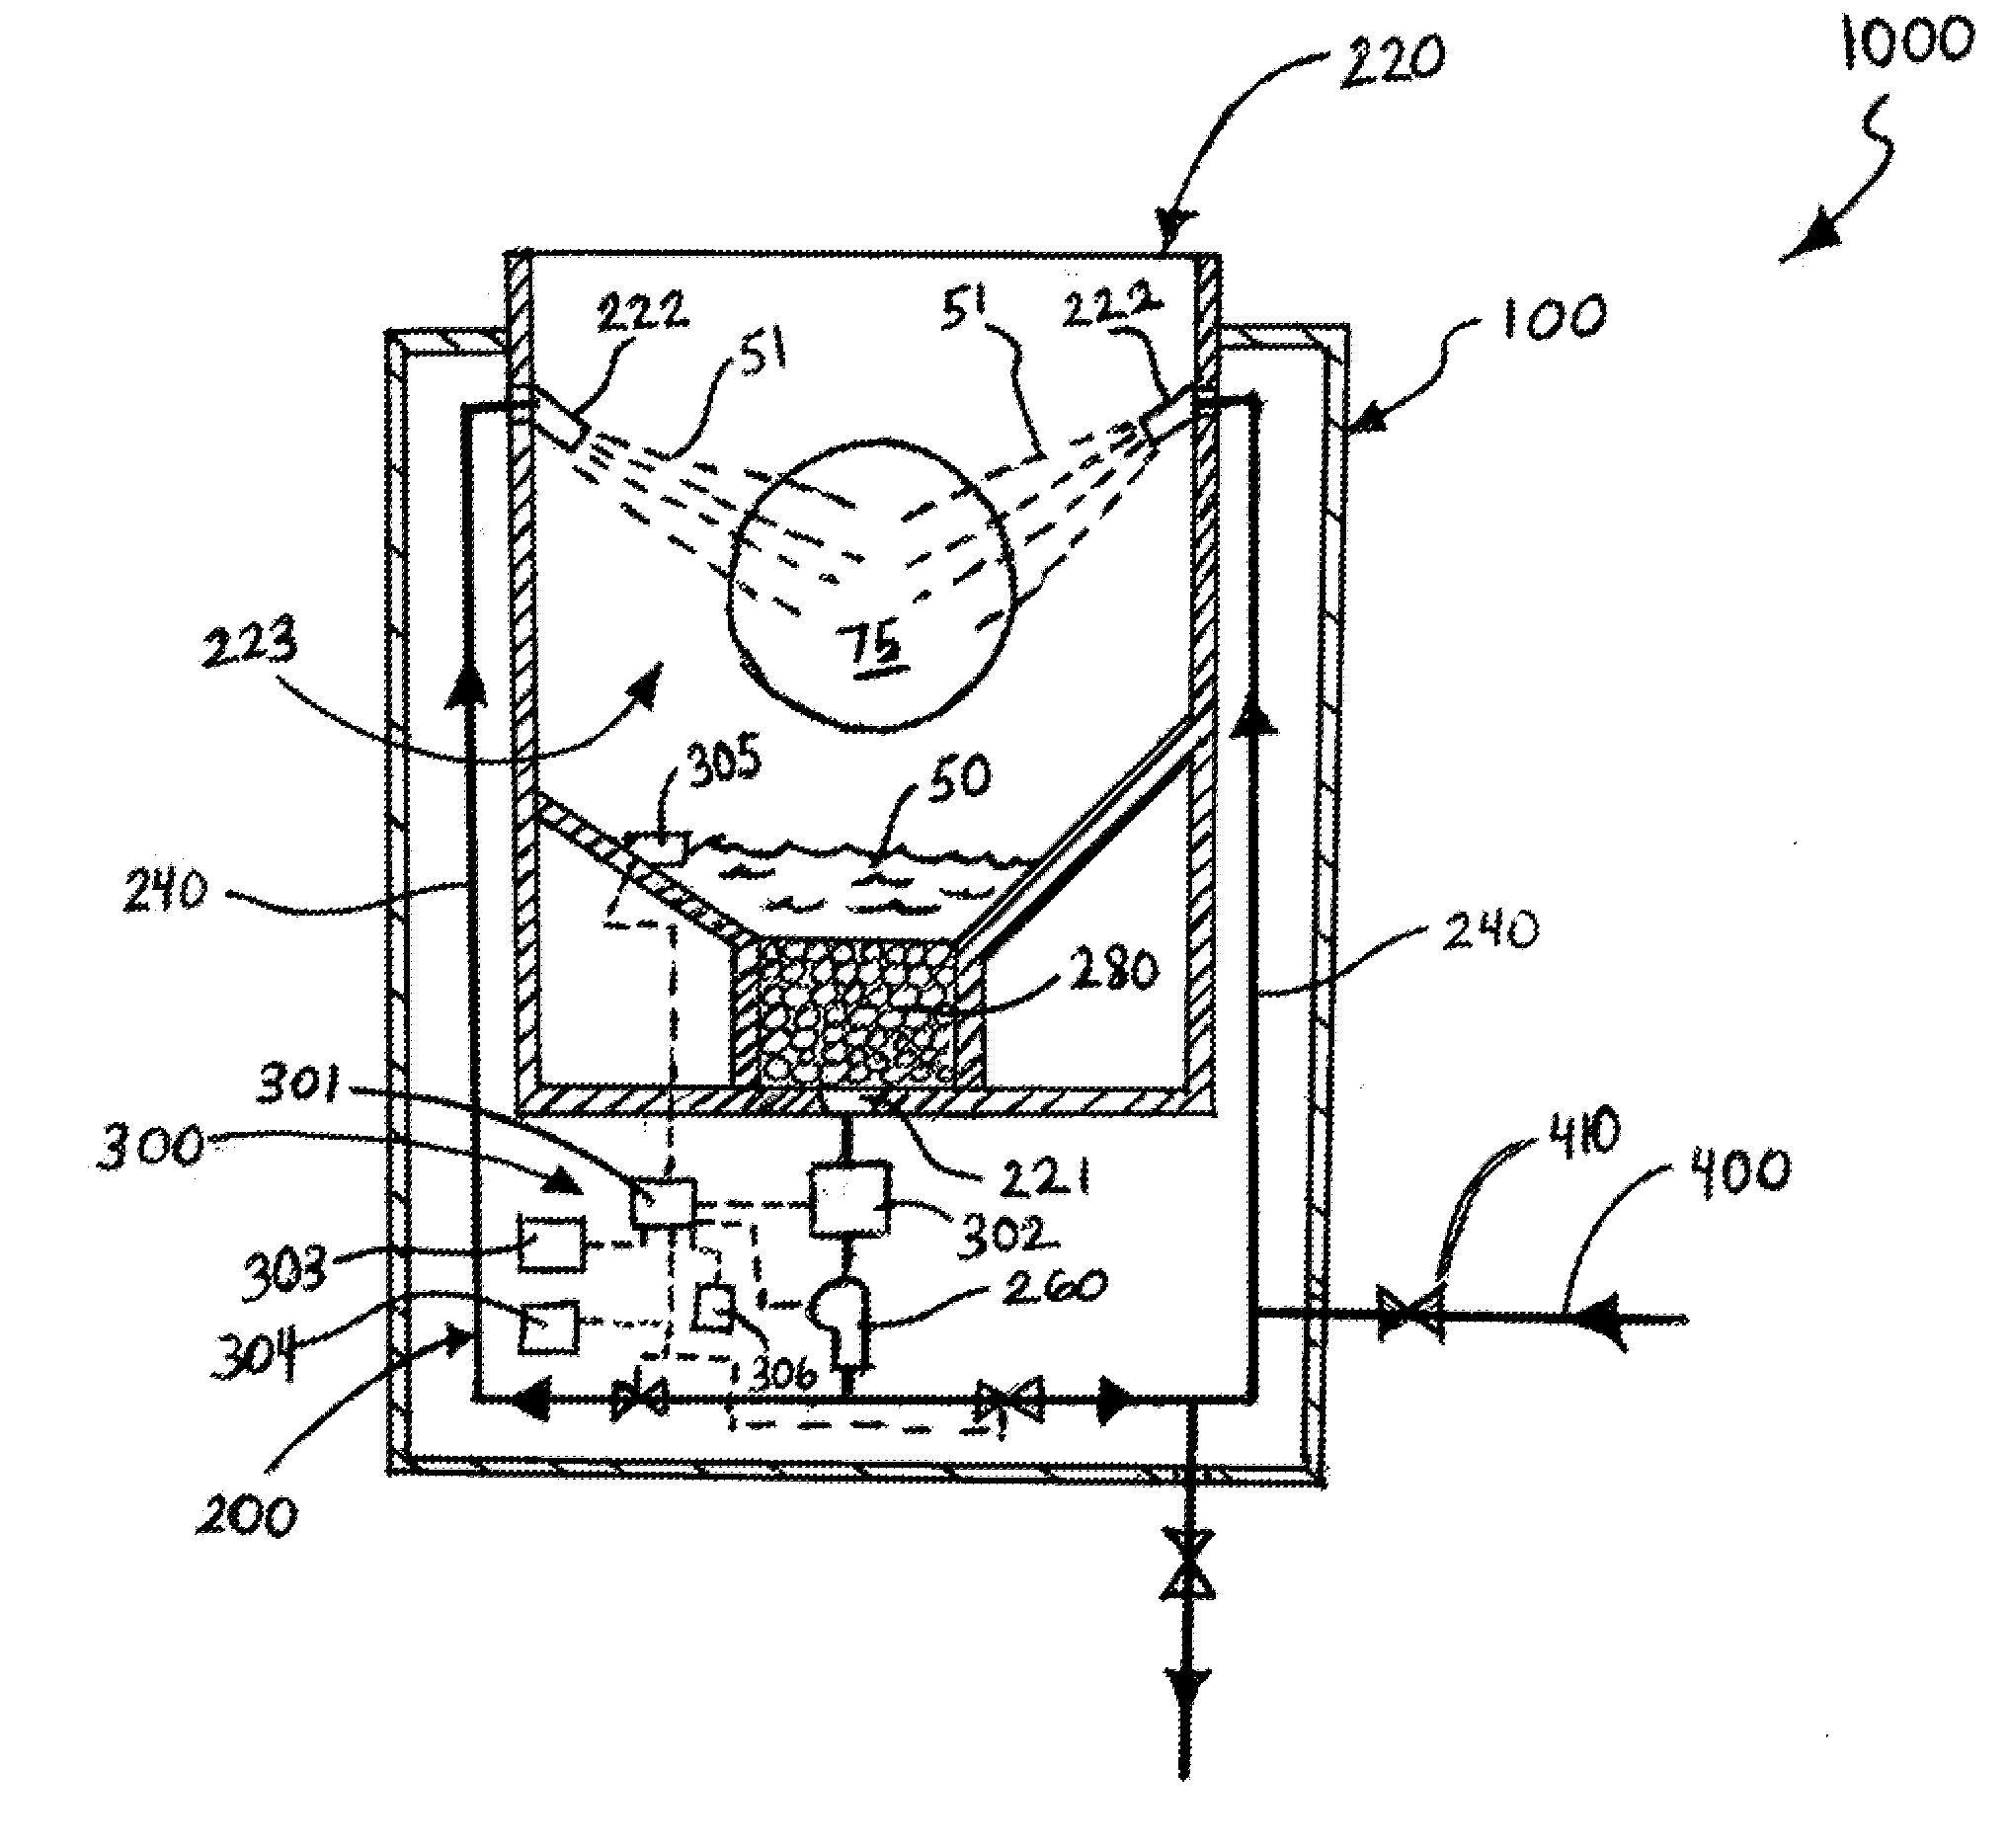 Reduced consumptions stand alone rinse tool having self-contained closed-loop fluid circuit, and method of rinsing substrates using the same